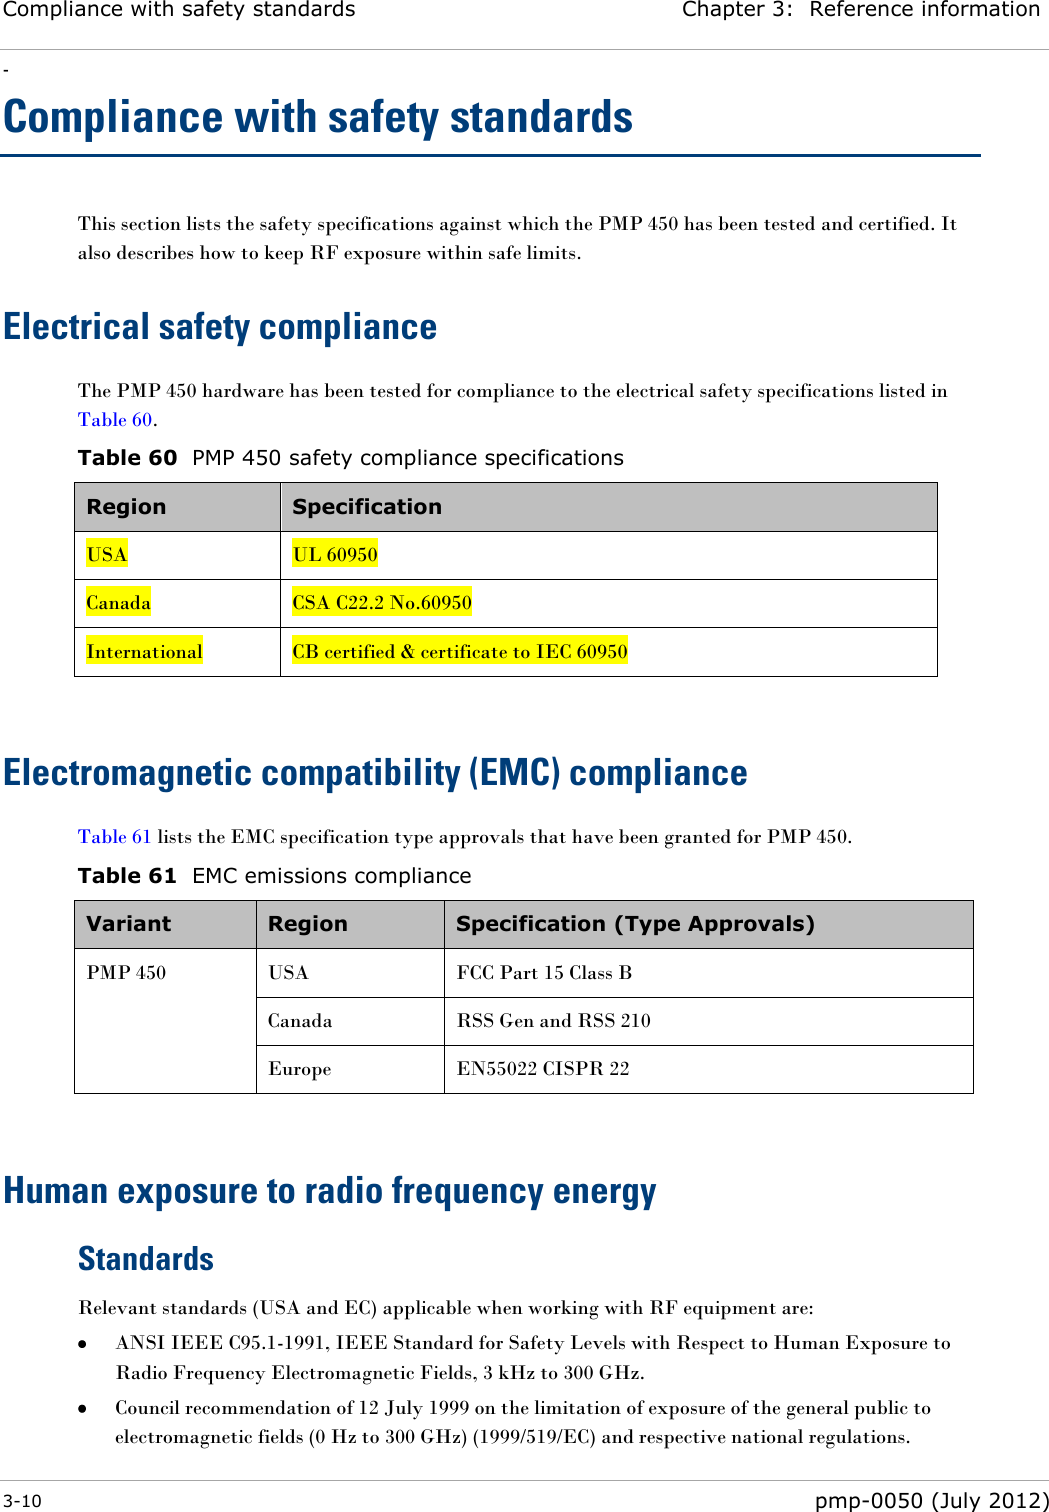 Compliance with safety standards Chapter 3:  Reference information - 3-10  pmp-0050 (July 2012)  Compliance with safety standards This section lists the safety specifications against which the PMP 450 has been tested and certified. It also describes how to keep RF exposure within safe limits. Electrical safety compliance  The PMP 450 hardware has been tested for compliance to the electrical safety specifications listed in Table 60. Table 60  PMP 450 safety compliance specifications Region Specification USA UL 60950 Canada CSA C22.2 No.60950 International CB certified &amp; certificate to IEC 60950  Electromagnetic compatibility (EMC) compliance Table 61 lists the EMC specification type approvals that have been granted for PMP 450. Table 61  EMC emissions compliance Variant Region Specification (Type Approvals) PMP 450 USA FCC Part 15 Class B Canada RSS Gen and RSS 210 Europe EN55022 CISPR 22  Human exposure to radio frequency energy Standards Relevant standards (USA and EC) applicable when working with RF equipment are:  ANSI IEEE C95.1-1991, IEEE Standard for Safety Levels with Respect to Human Exposure to Radio Frequency Electromagnetic Fields, 3 kHz to 300 GHz.  Council recommendation of 12 July 1999 on the limitation of exposure of the general public to electromagnetic fields (0 Hz to 300 GHz) (1999/519/EC) and respective national regulations. 